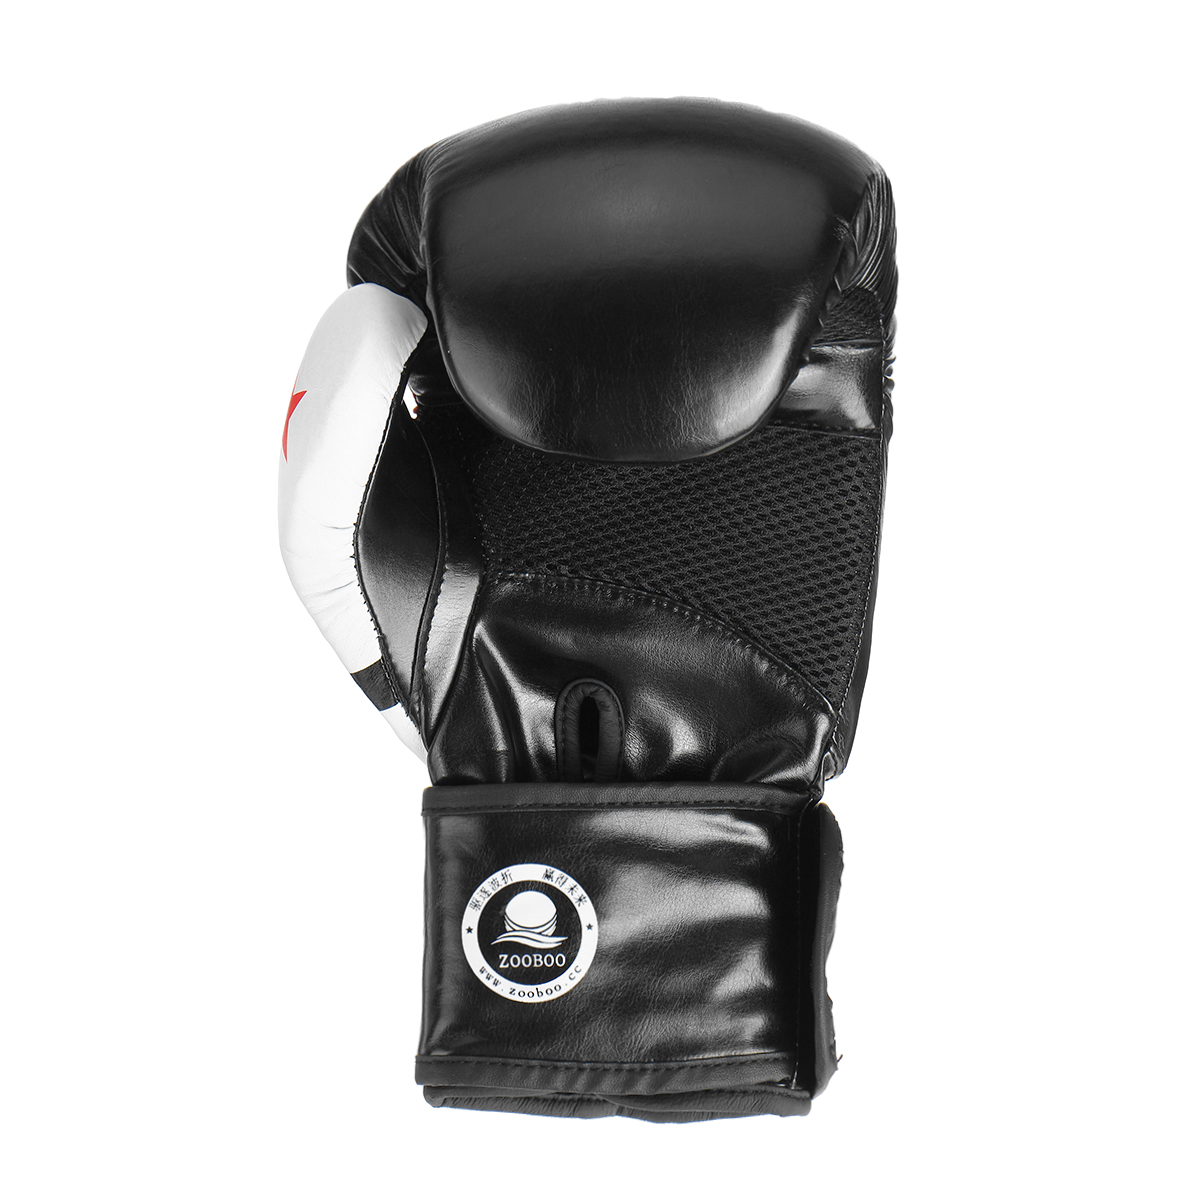 1-Pair-Adult-Boxing-Gloves-Professional-Mesh-Breathable-PU-Leather-Gloves-Sanda-Boxing-Training-Acce-1676767-9